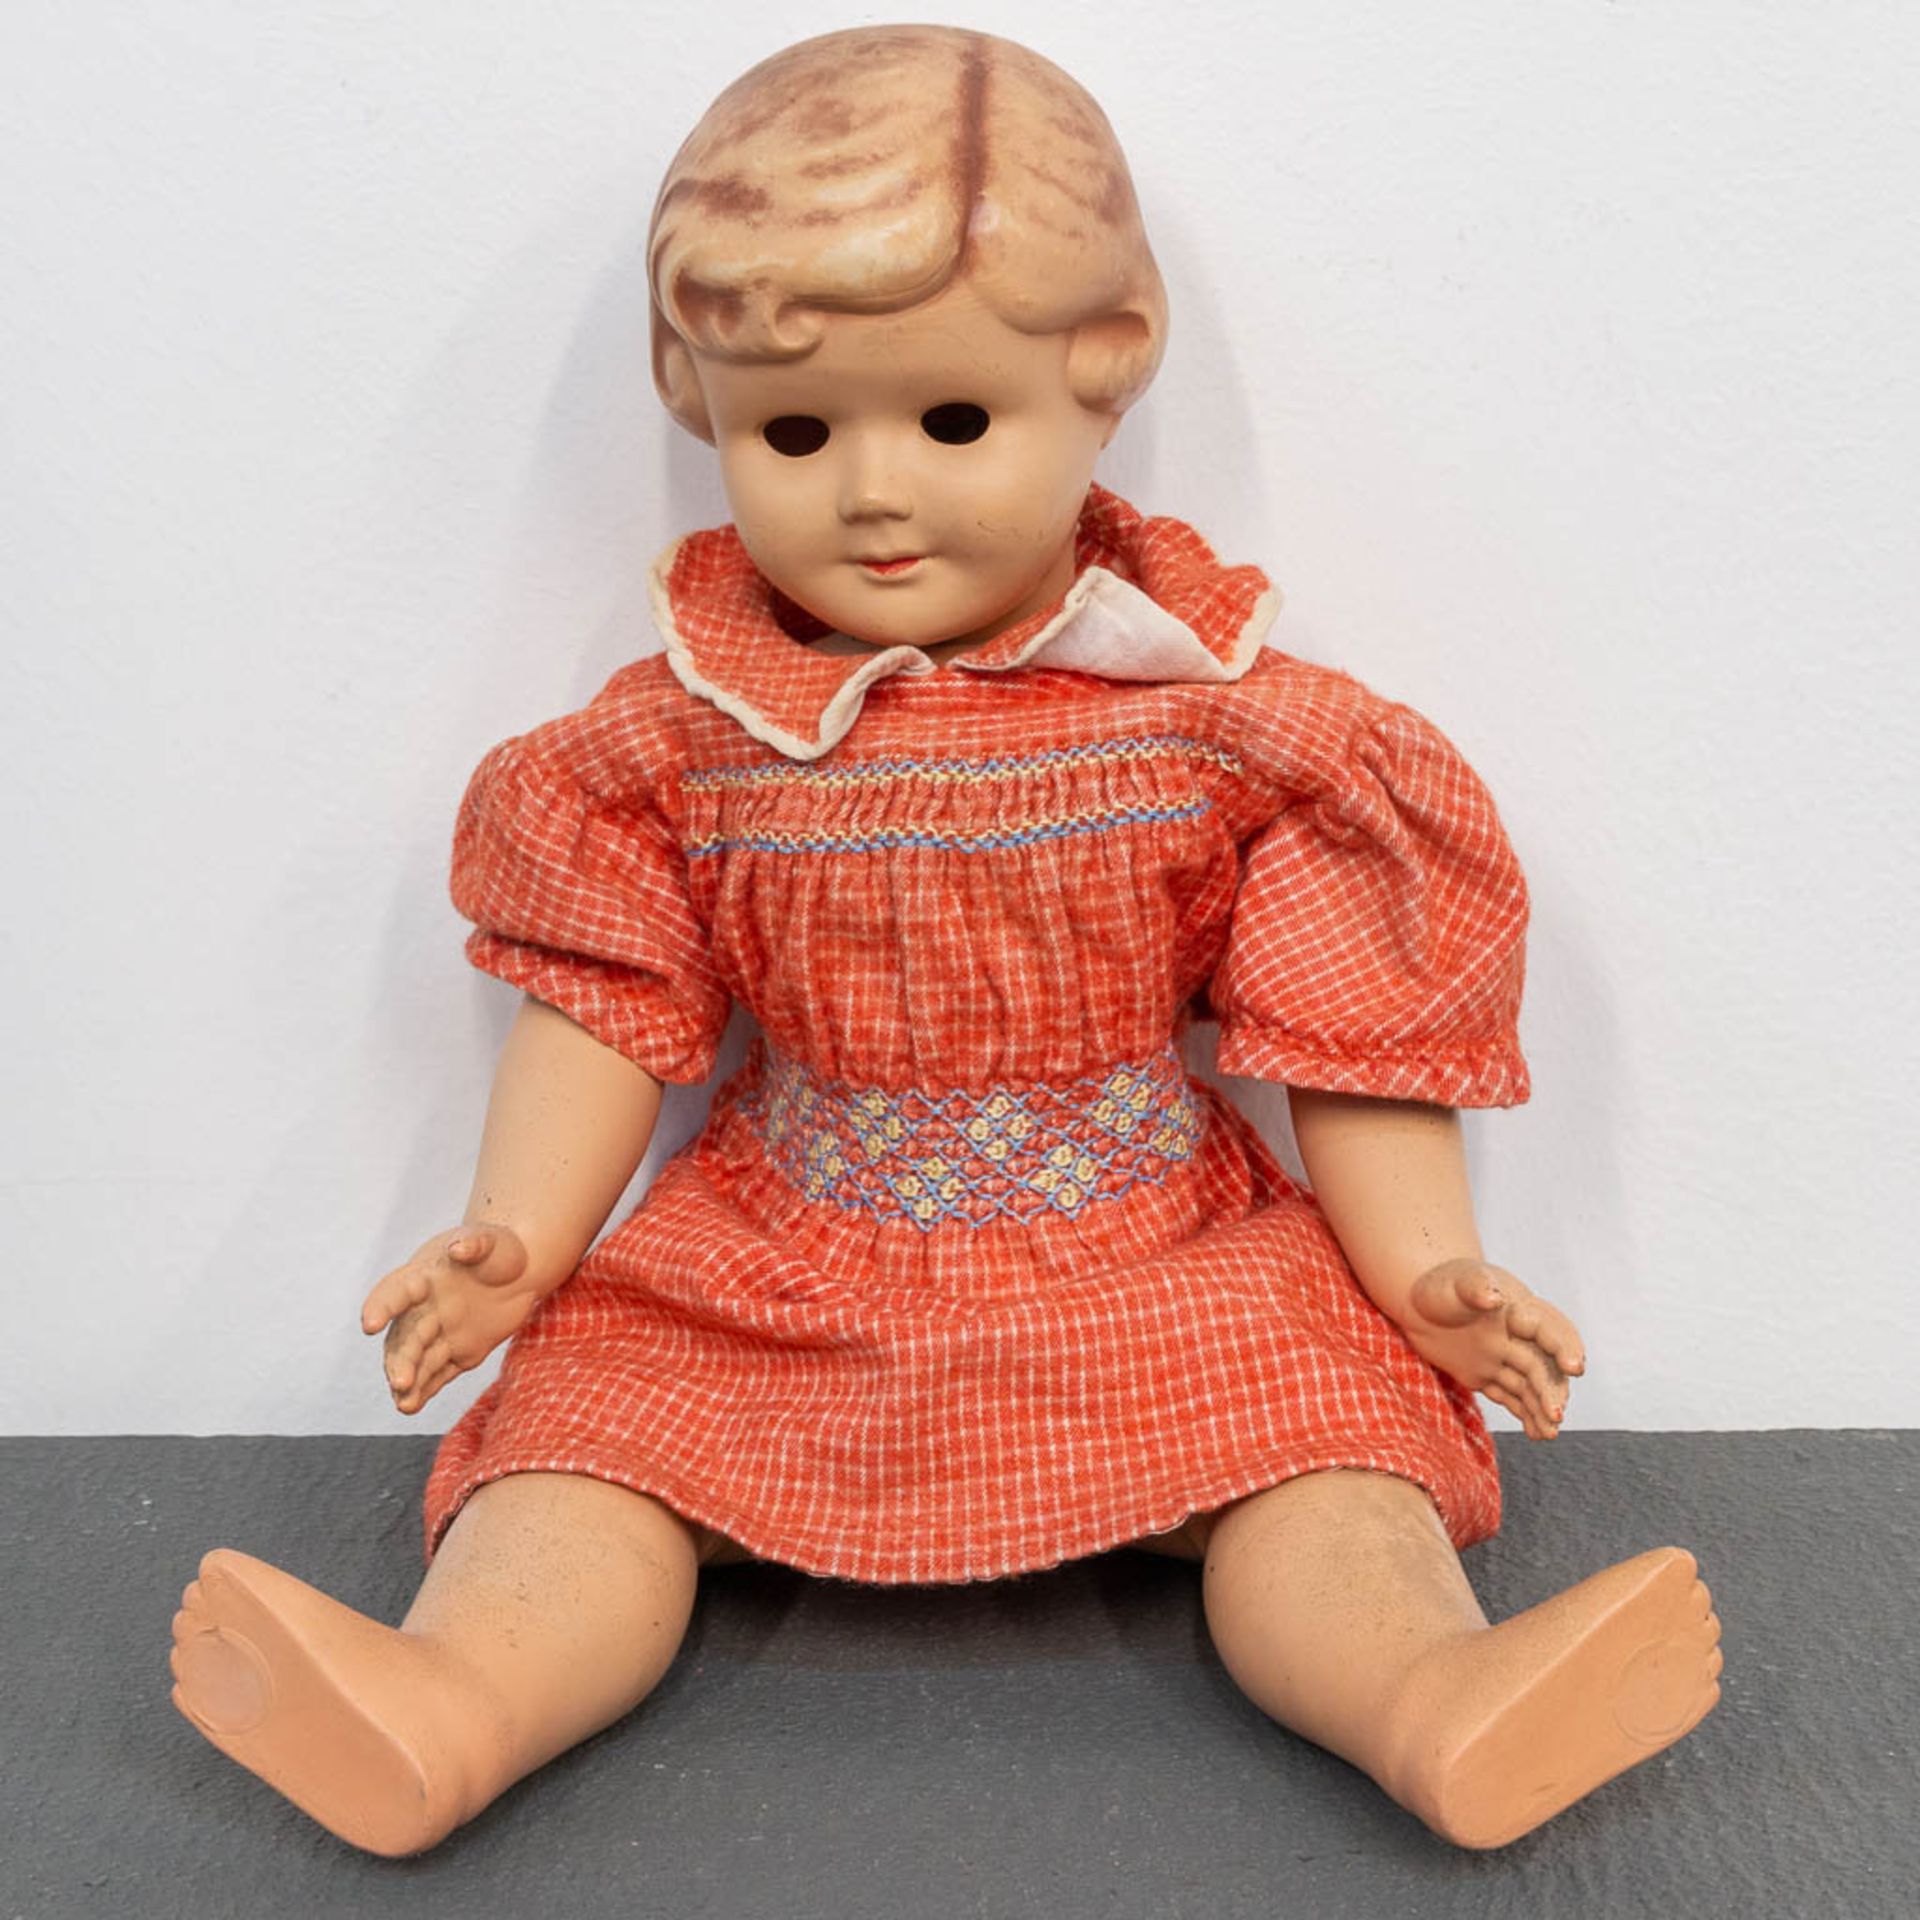 A Collection of 4 Unica Dolls, made in Belgium. - Image 9 of 19